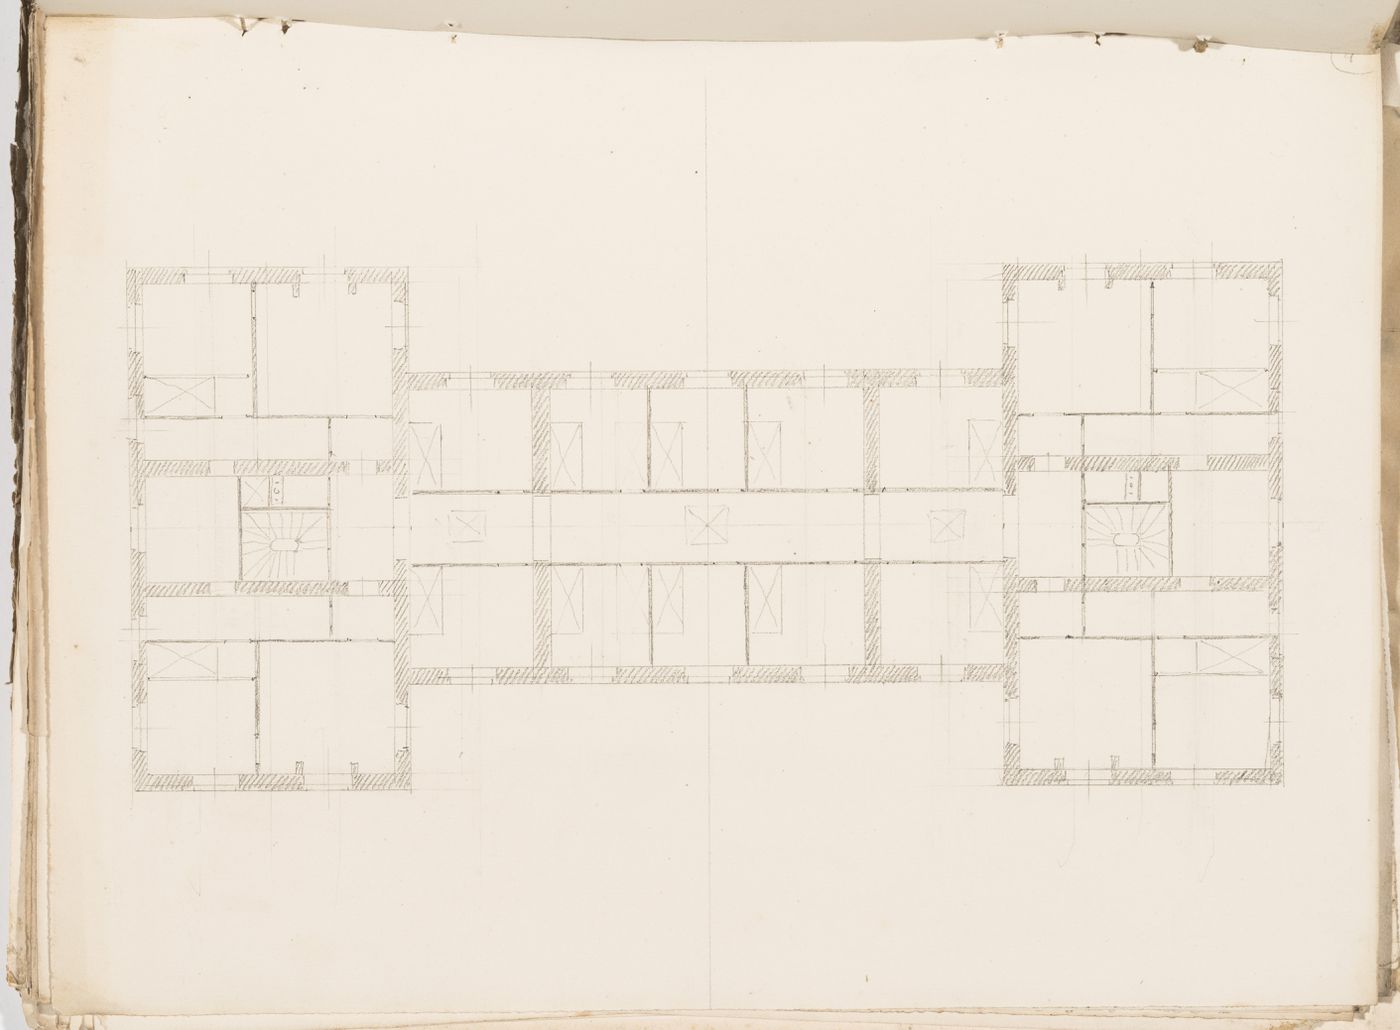 Project no. 4 for a country house for comte Treilhard: Second floor plan